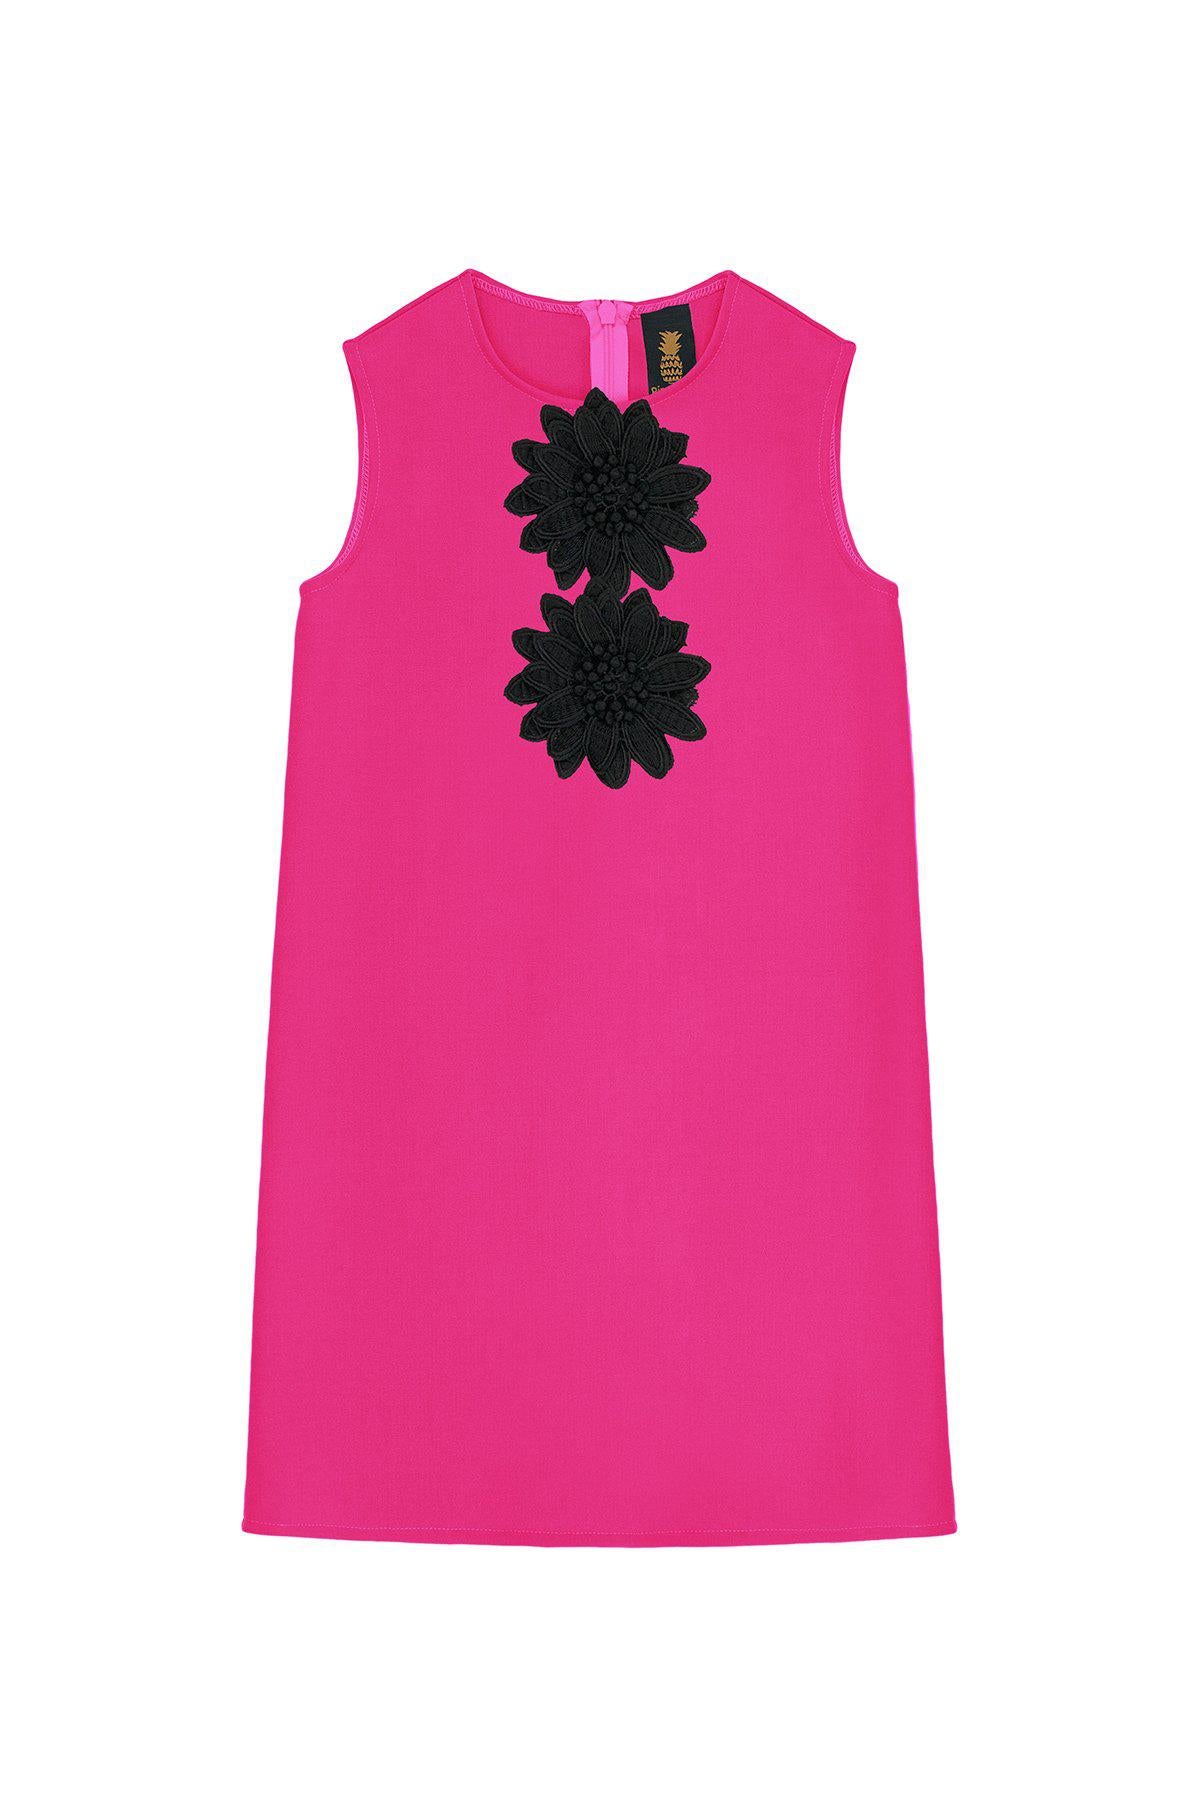 Pink Fuchsia Coral Cute A-line Shift Party Dress - Girls - Pineapple Clothing